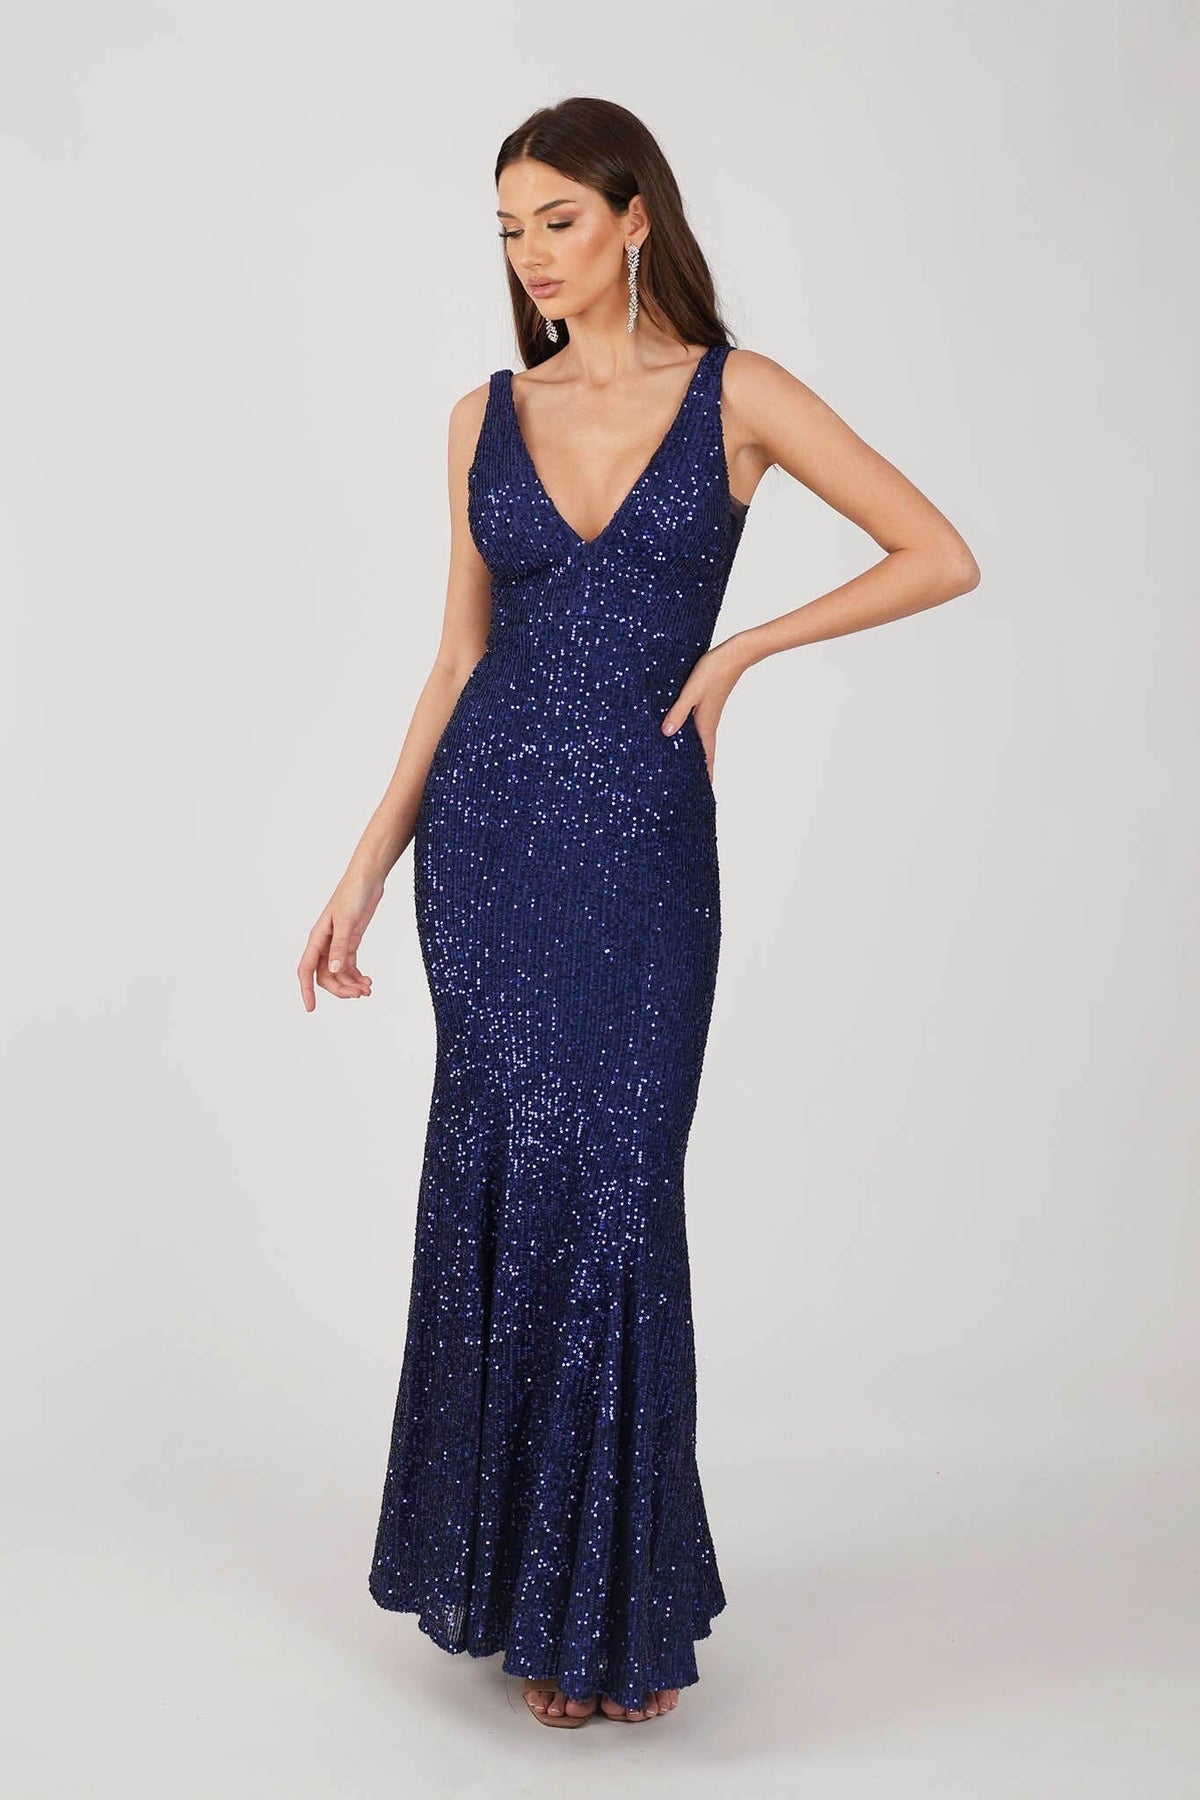 Navy Blue Fitted Sequin Evening Gown with Deep V Neckline